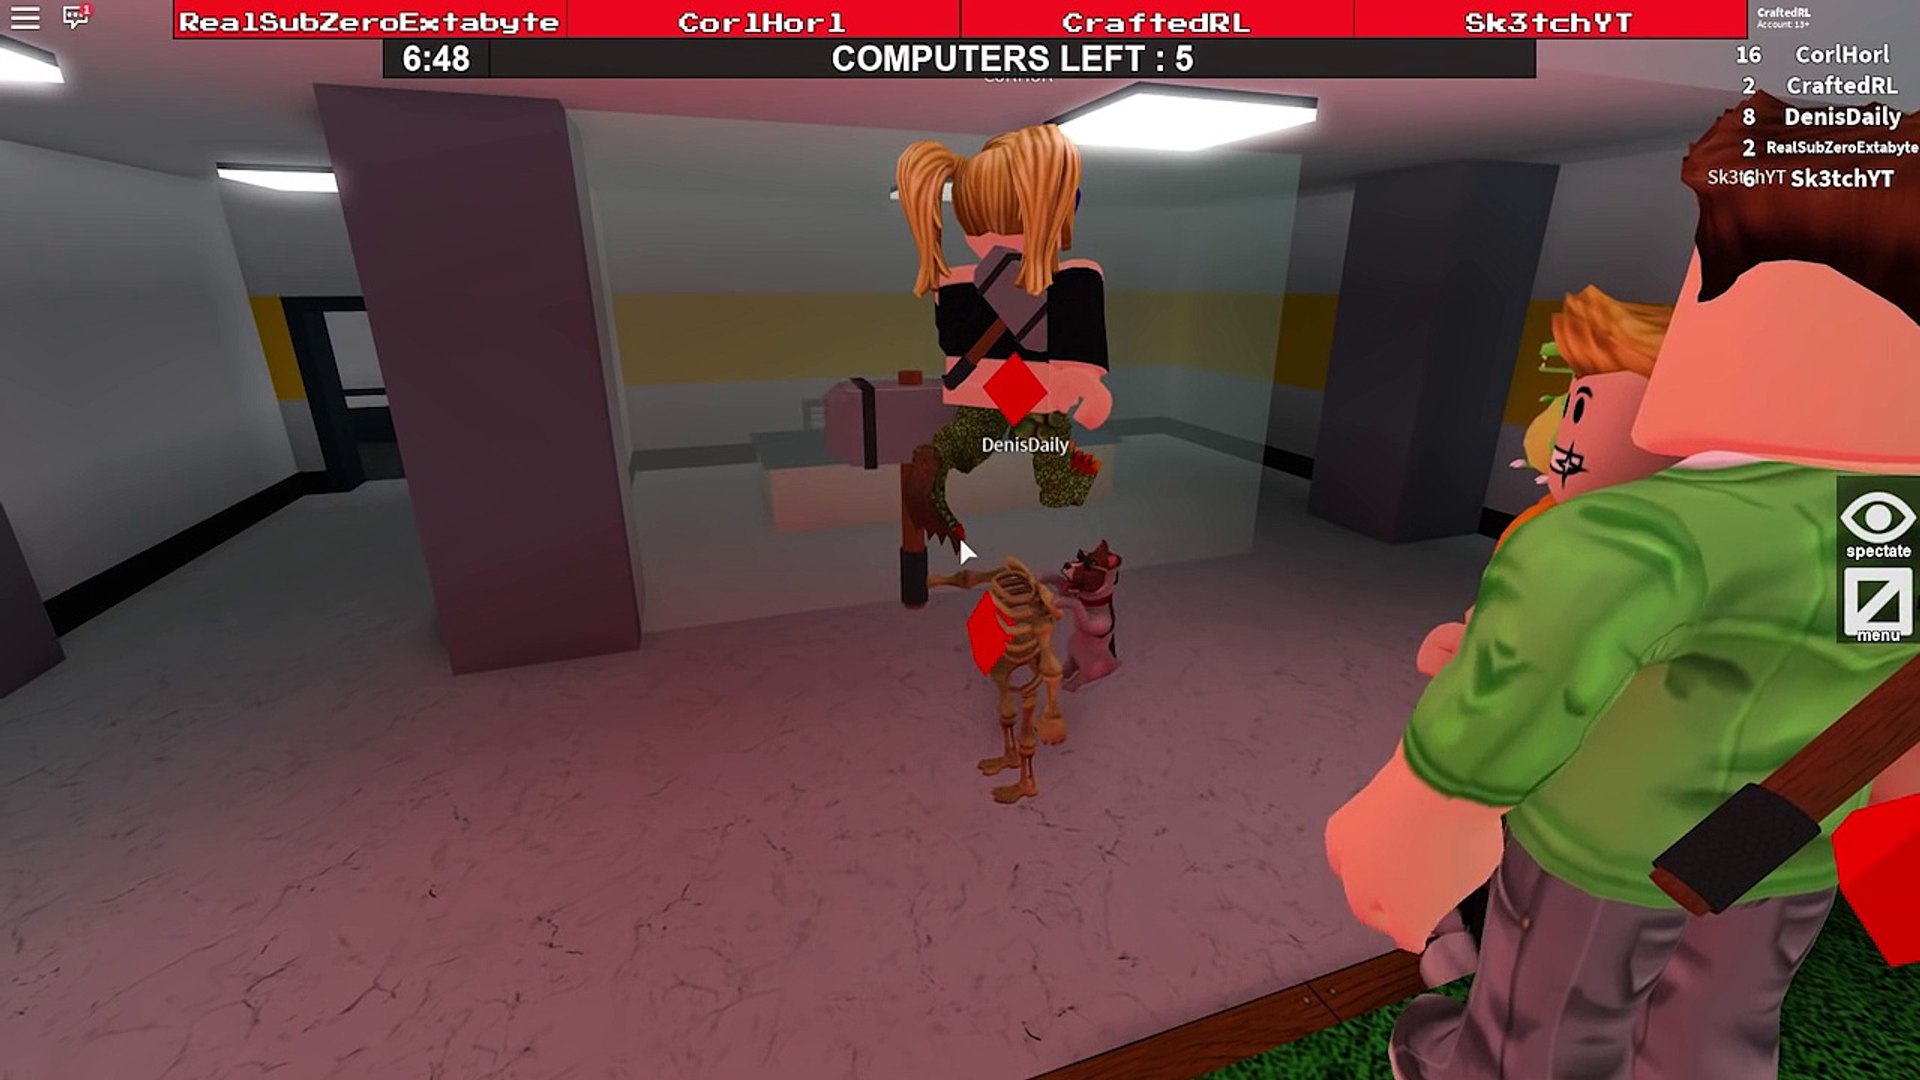 Impossible Simon Says In Flee The Facility Roblox Flee The Facility Dailymotion Video - flee the facility roblox